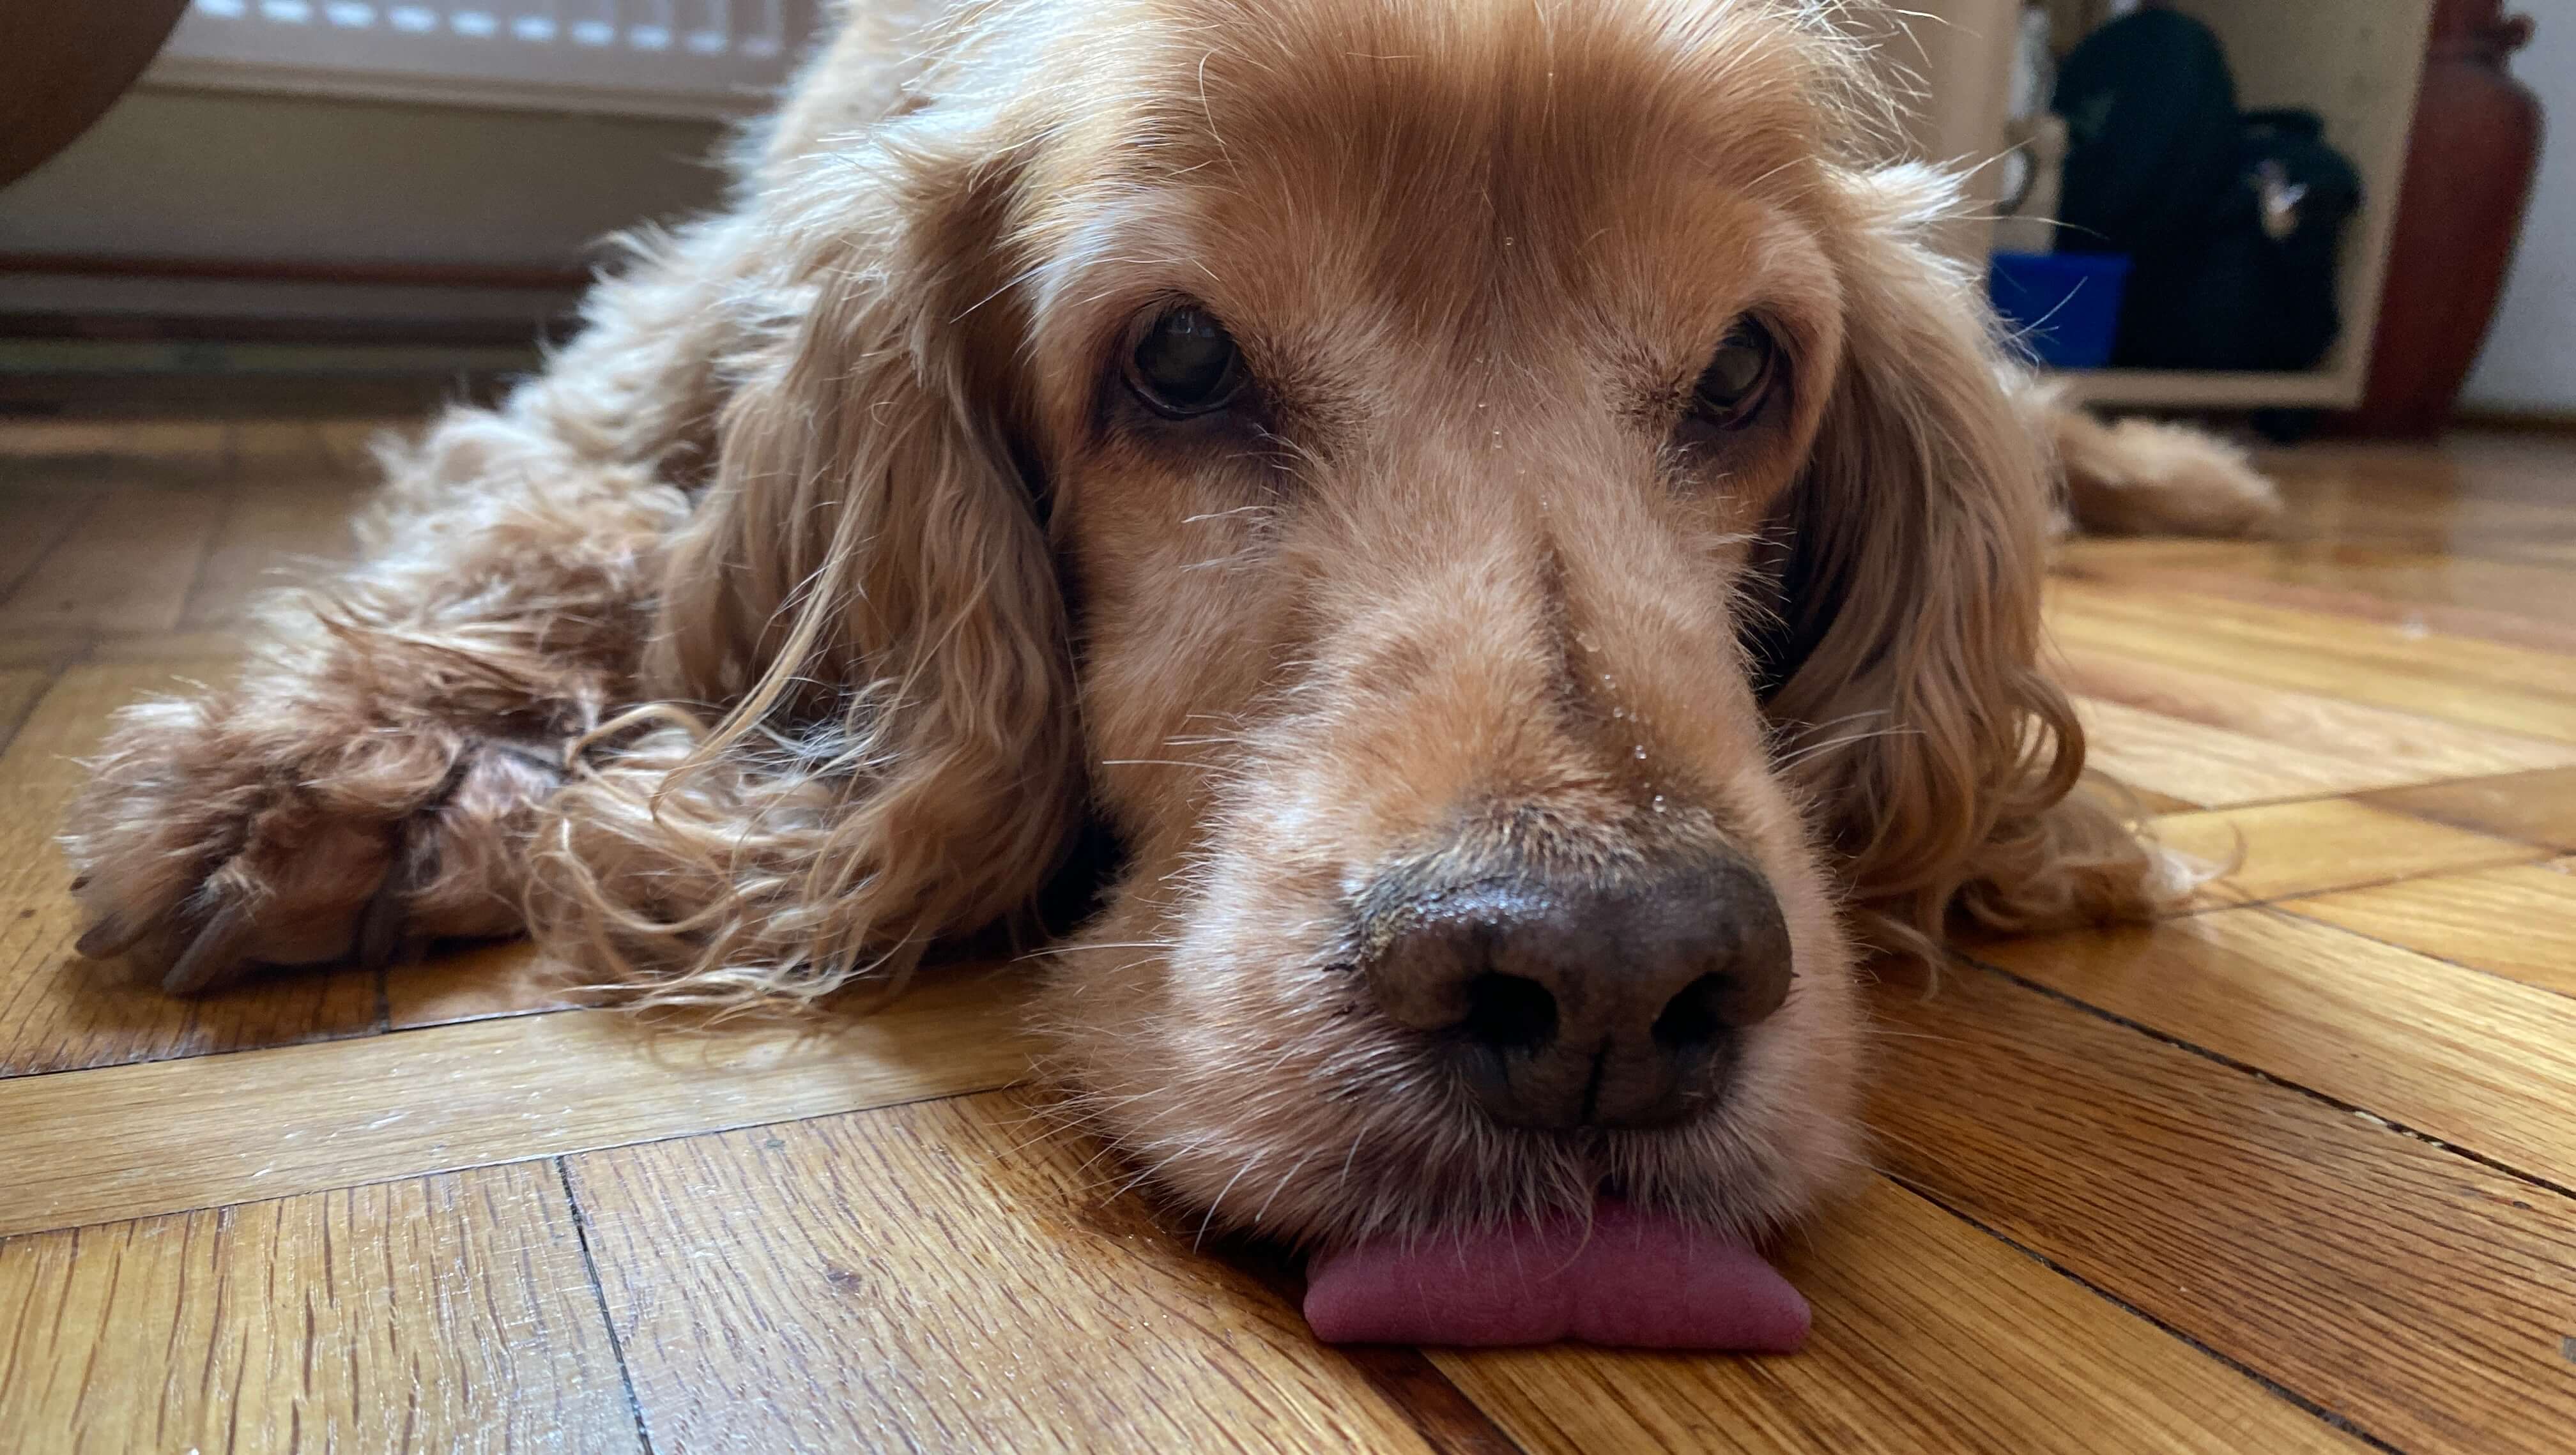 A brown cocker spaniel lying on the floor, its tongue sticking out slightly